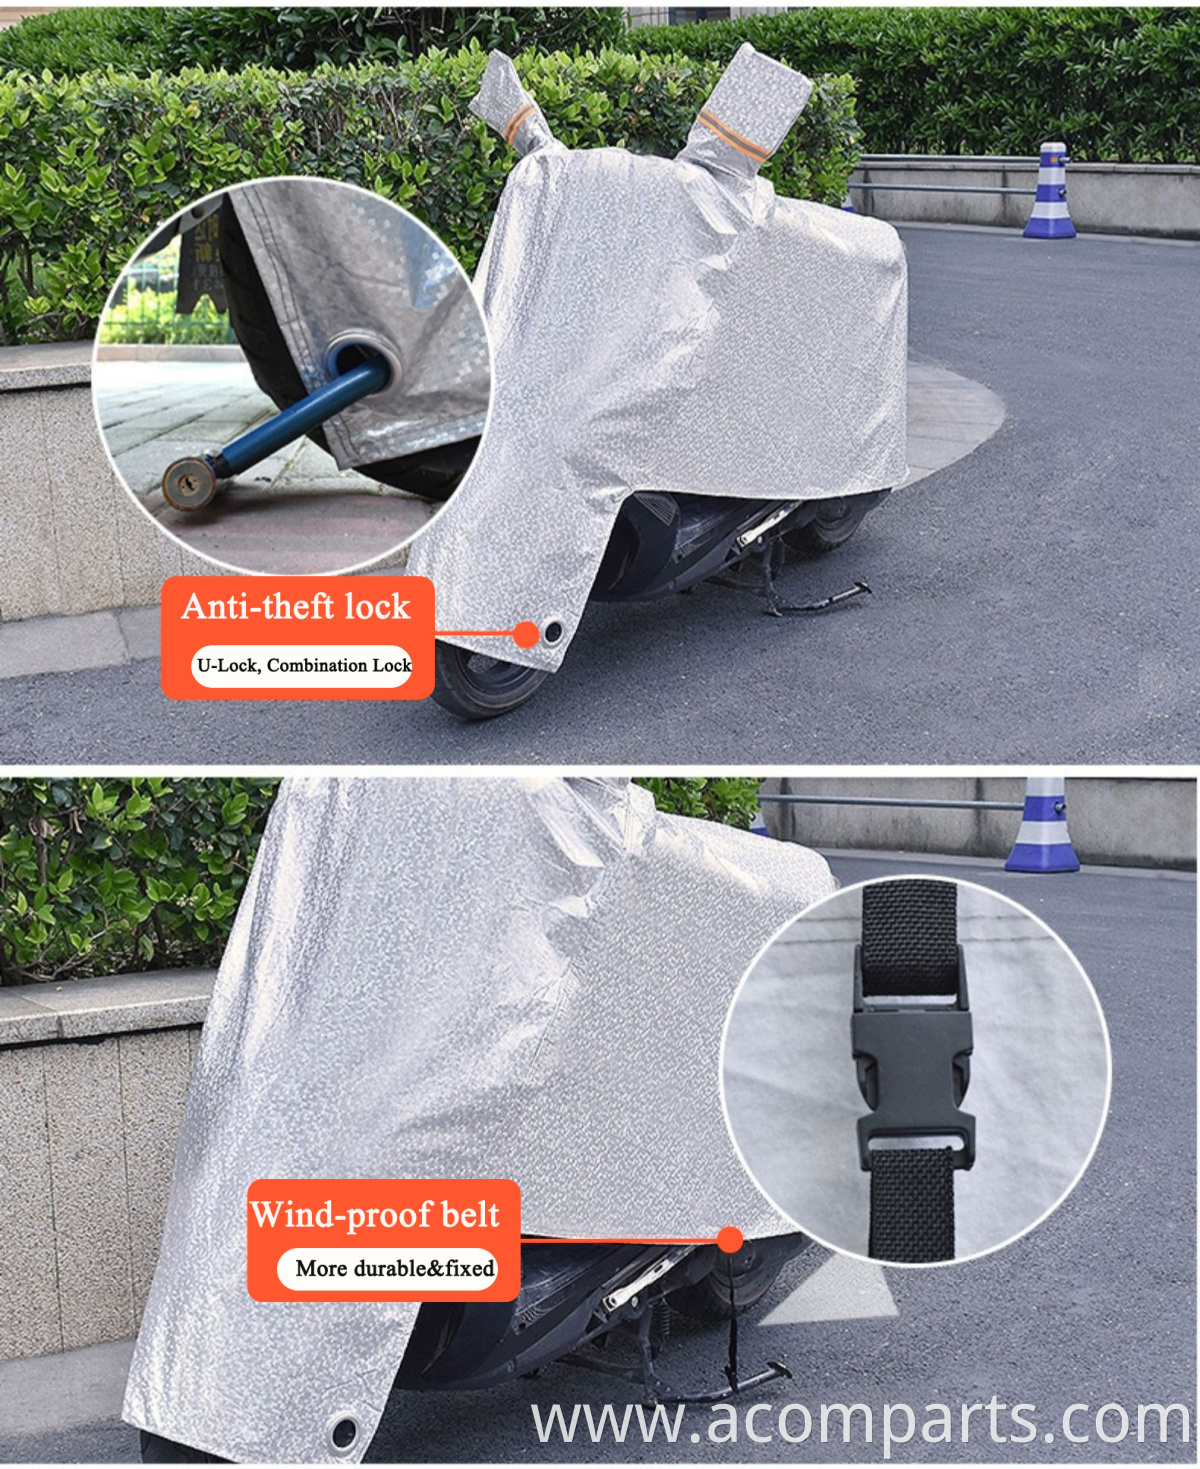 All weather protection anti UV 190T polyester universal waterproof clear portable motorcycle cover